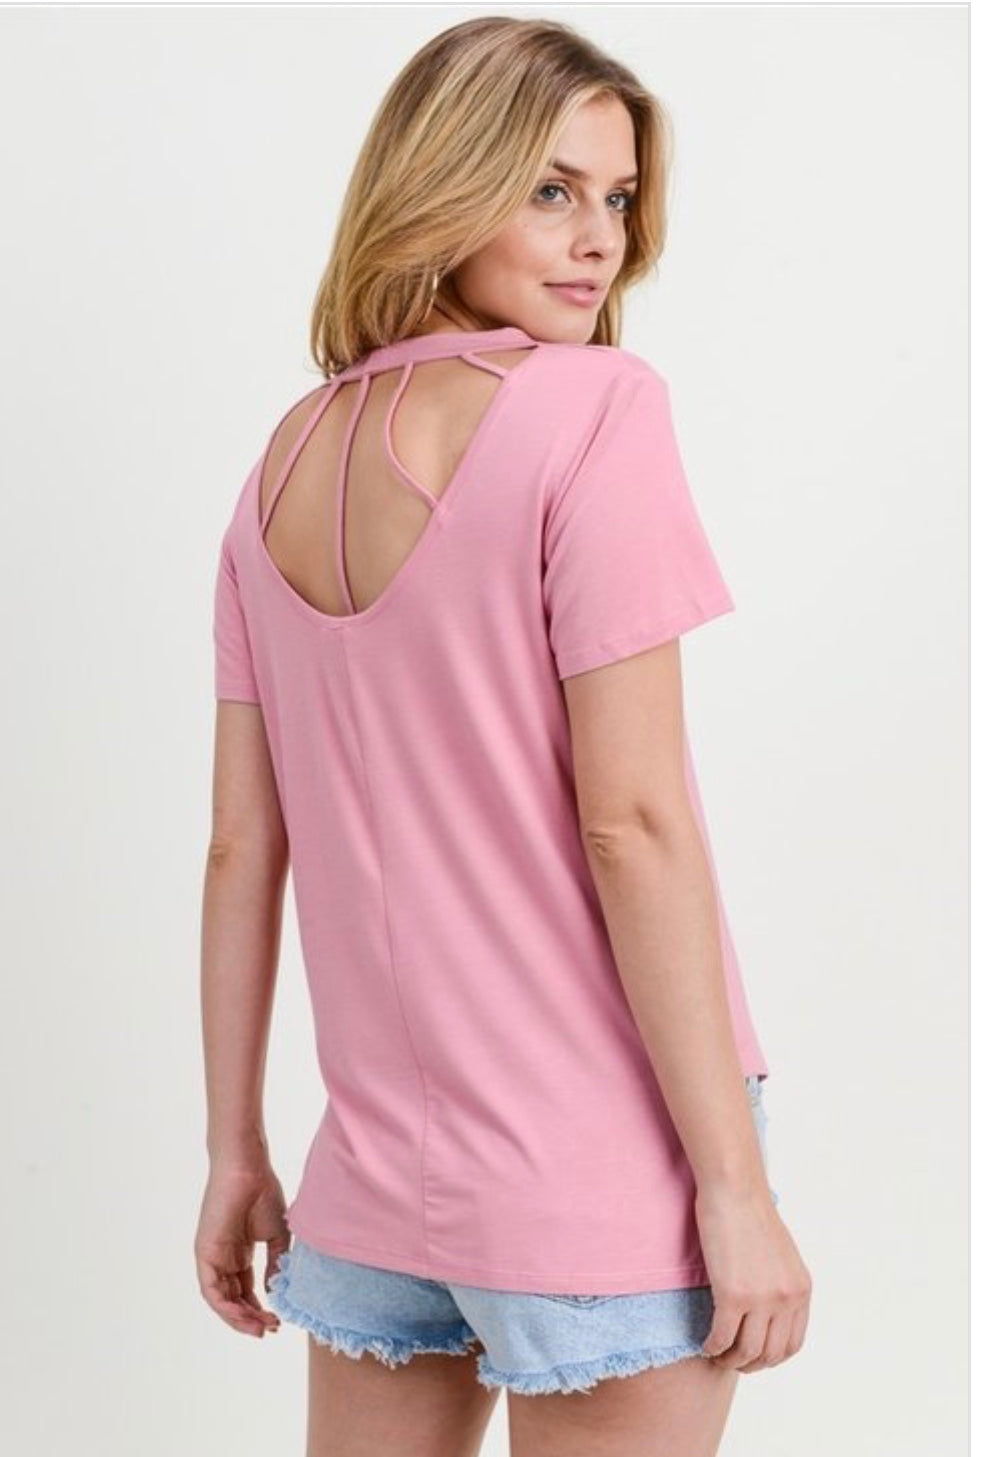 Pastel Pink Short Sleeve Top | Strappy Back Shirt MomMe and More